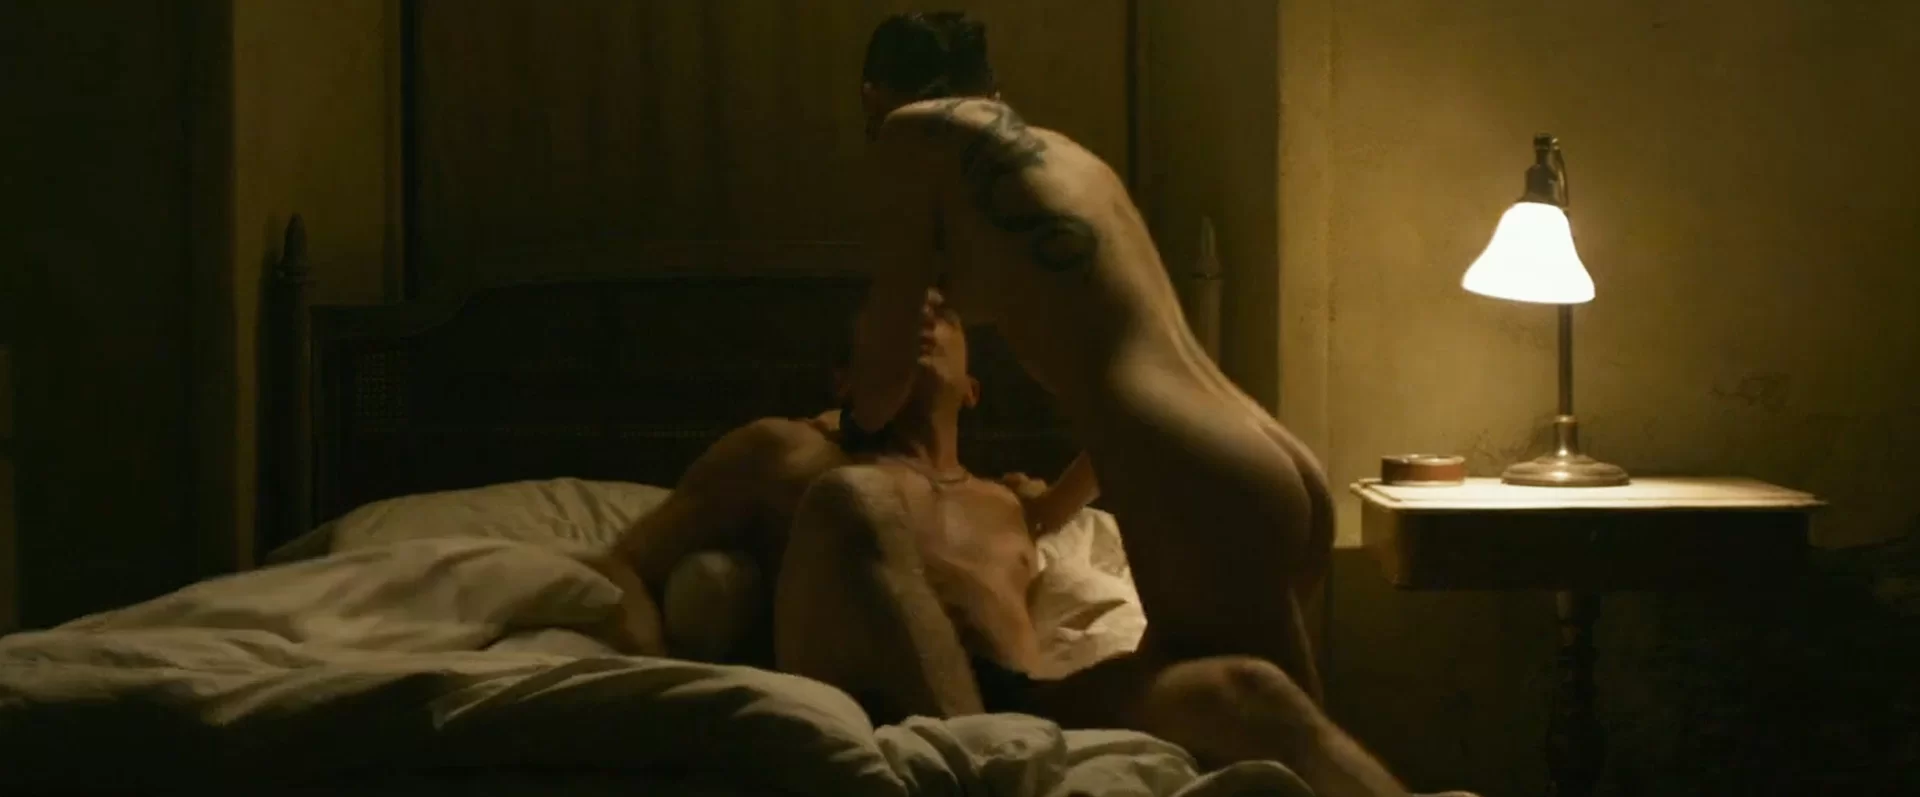 Rooney Mara Naked Porn - Rooney Mara - The girl with the dragon tattoo (2011) - Celebs Roulette Tube